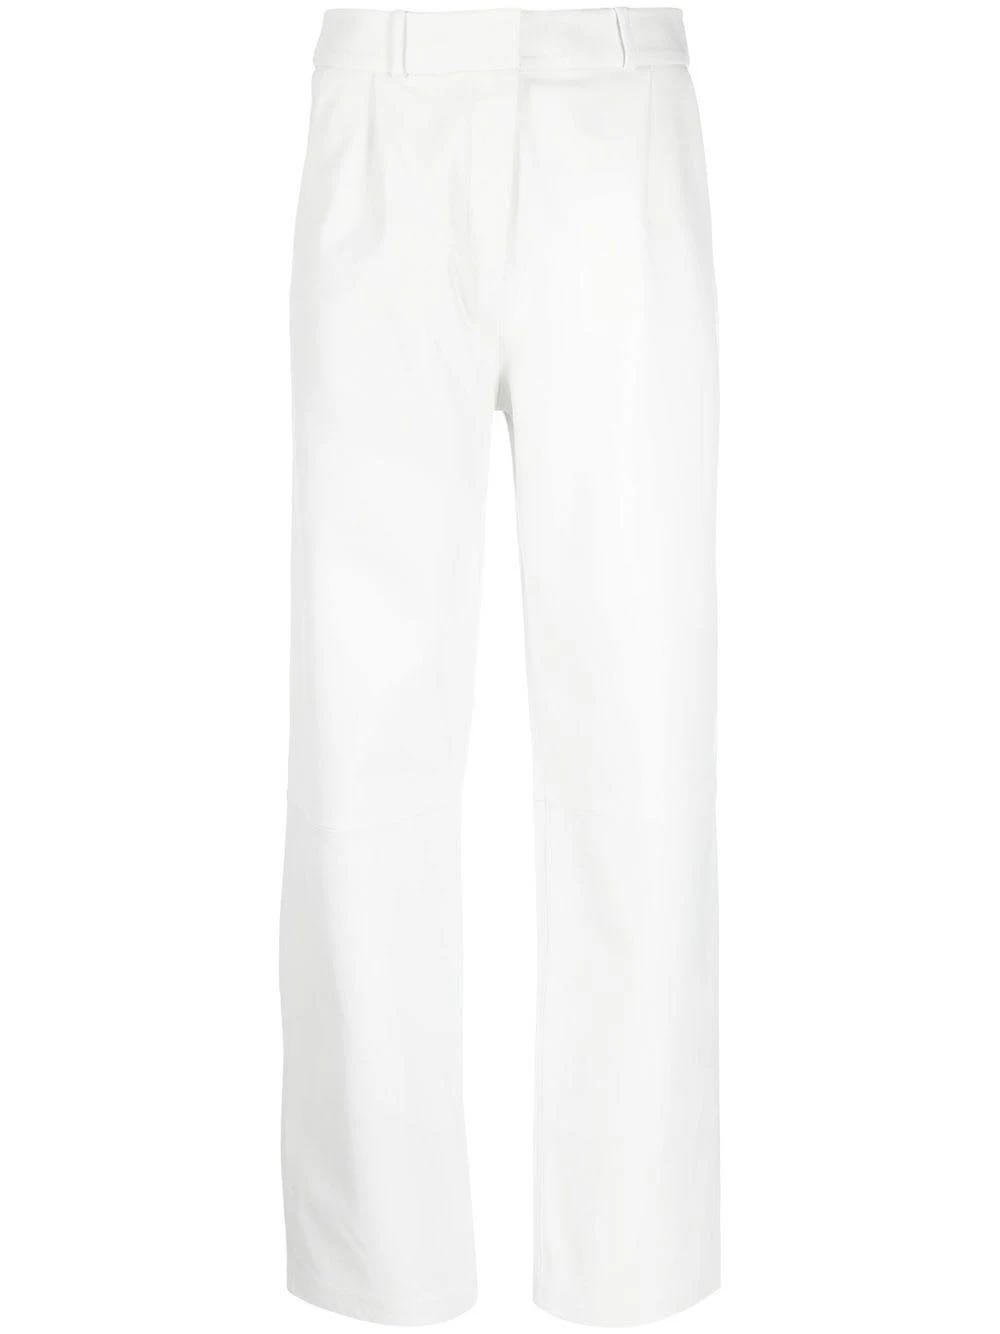 Chic White Leather Pleated Trousers by KASSL Editions | Image